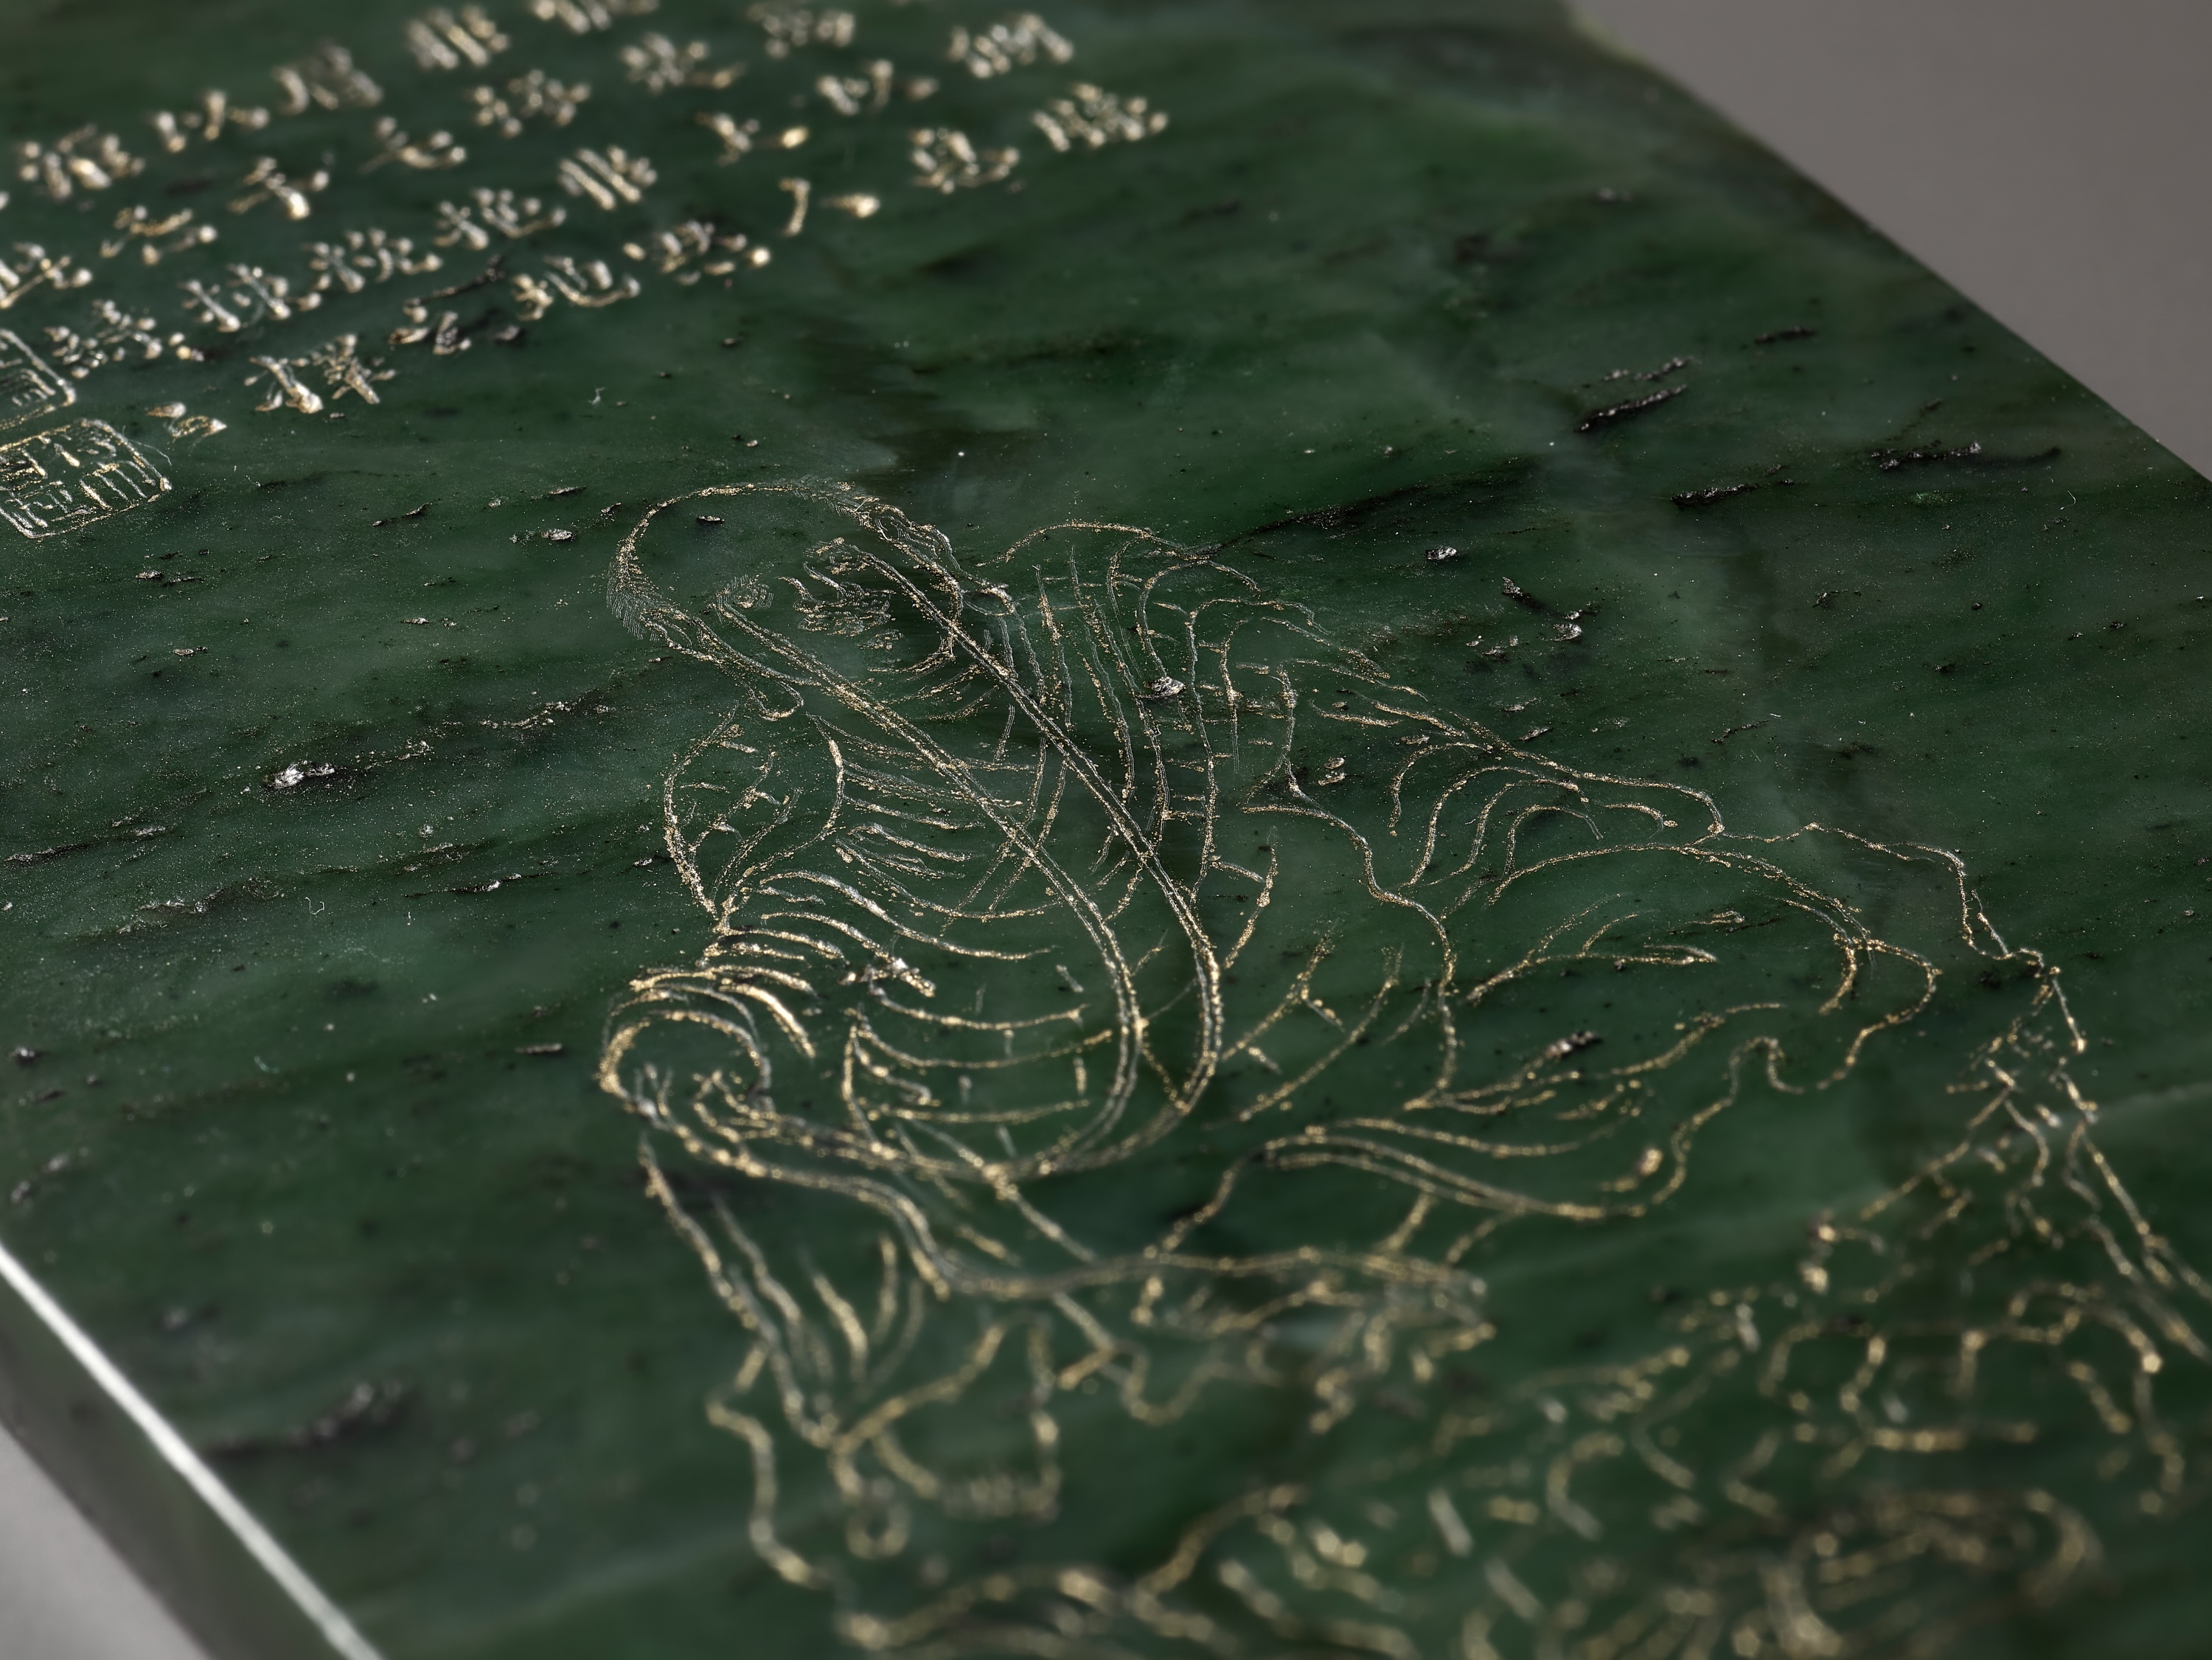 AN IMPERIAL JADE 'LUOHAN' PANEL AFTER GUANXIU (823-912 AD), WITH A POEM BY HONGLI (1711-1799)